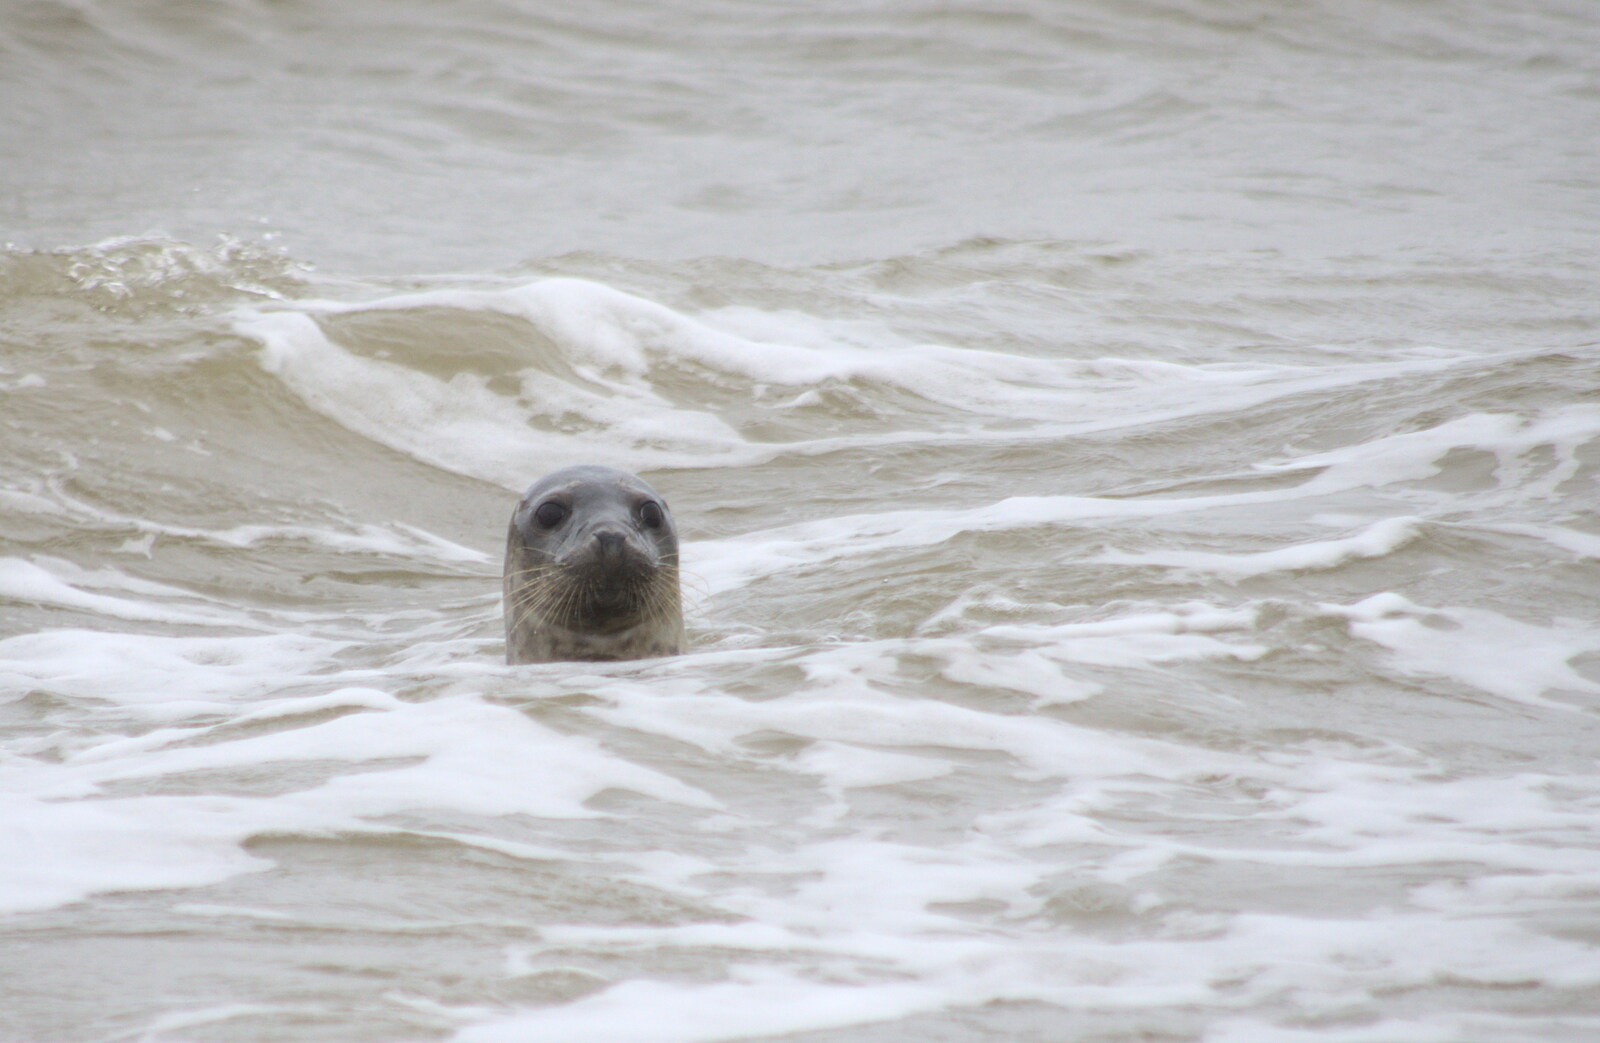 A curious seal pops its head out of the water from A Wet Weekend of Camping, Waxham Sands, Norfolk - 13th June 2015